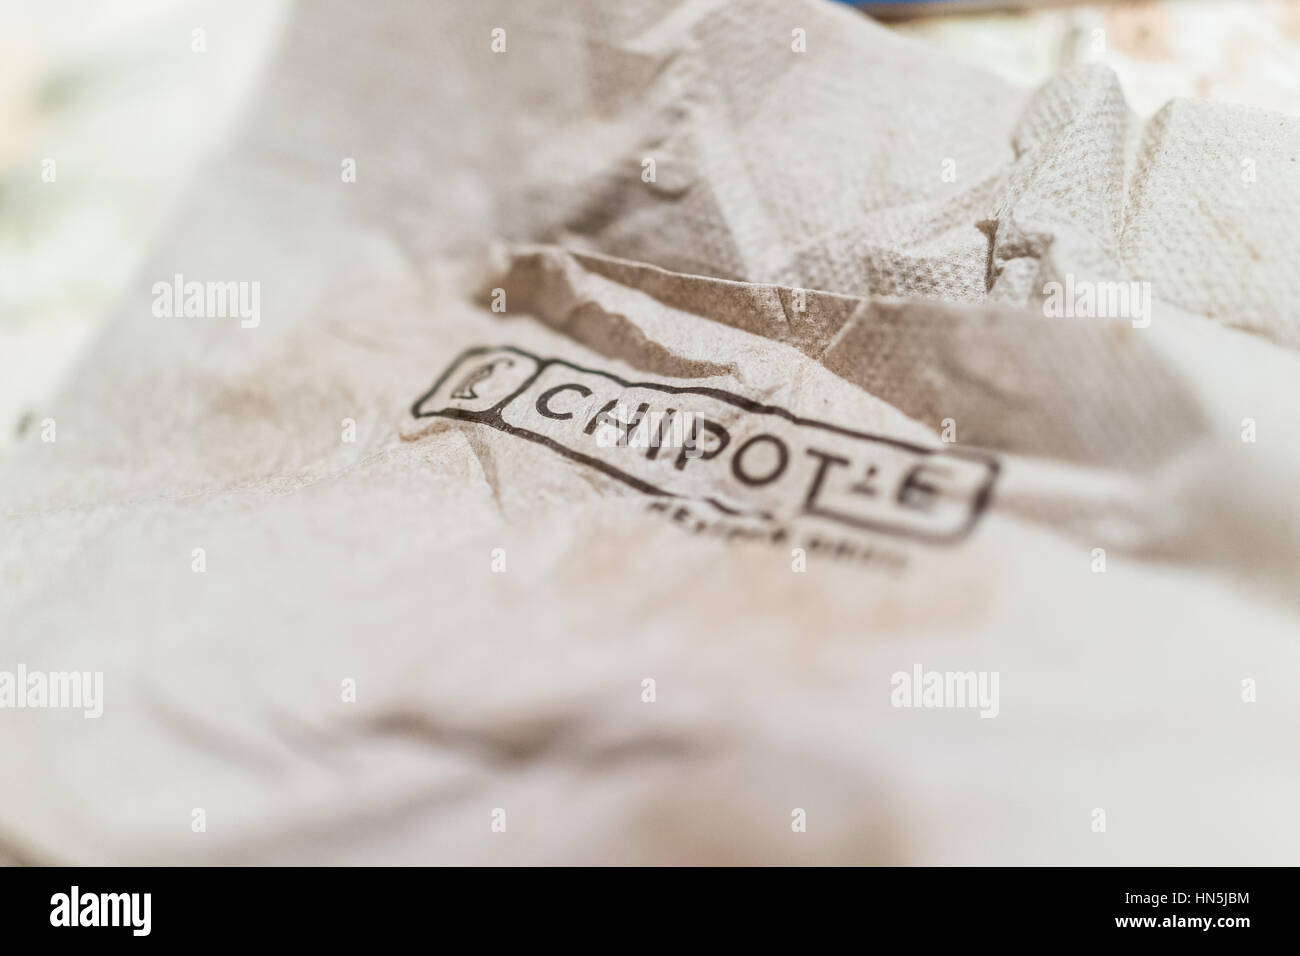 Brown crinkled napkin with Chipotle sign word Stock Photo